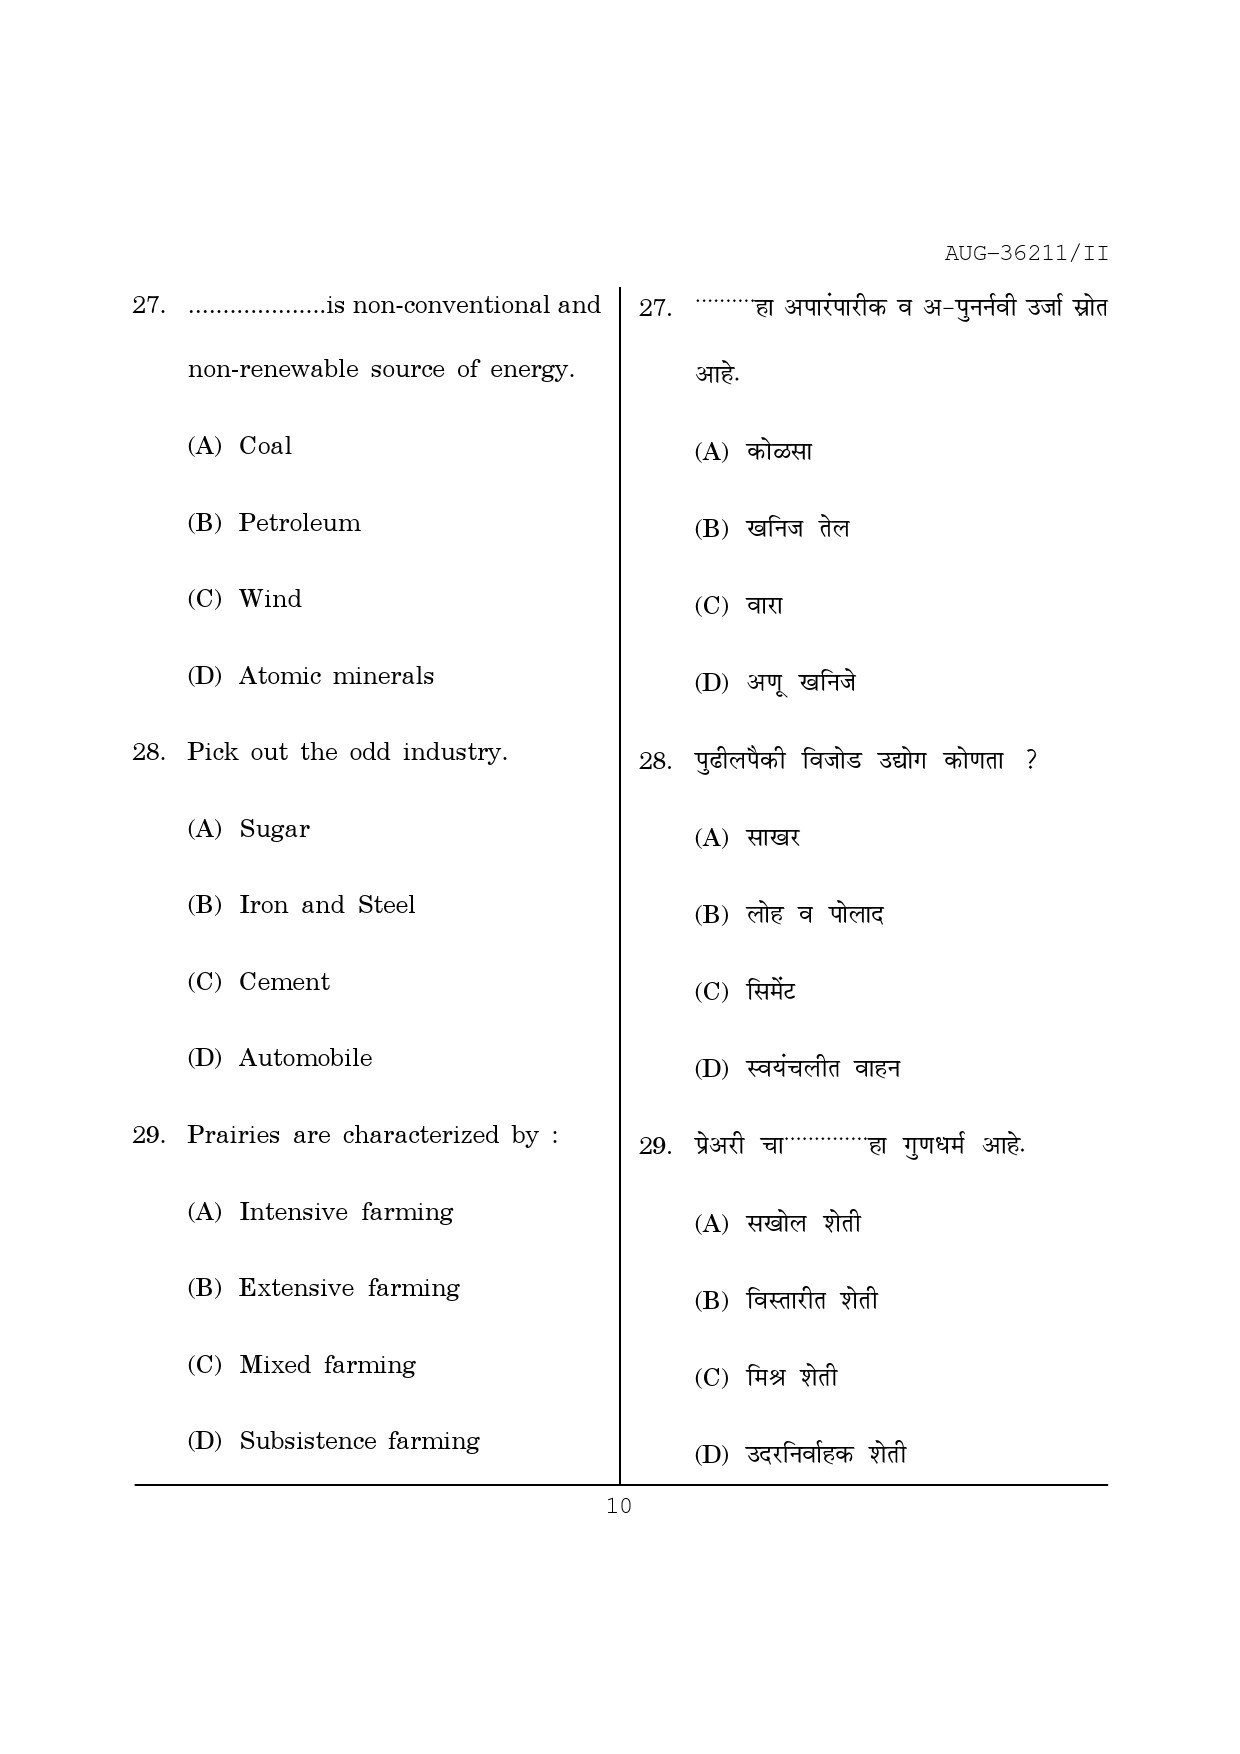 Maharashtra SET Geography Question Paper II August 2011 10